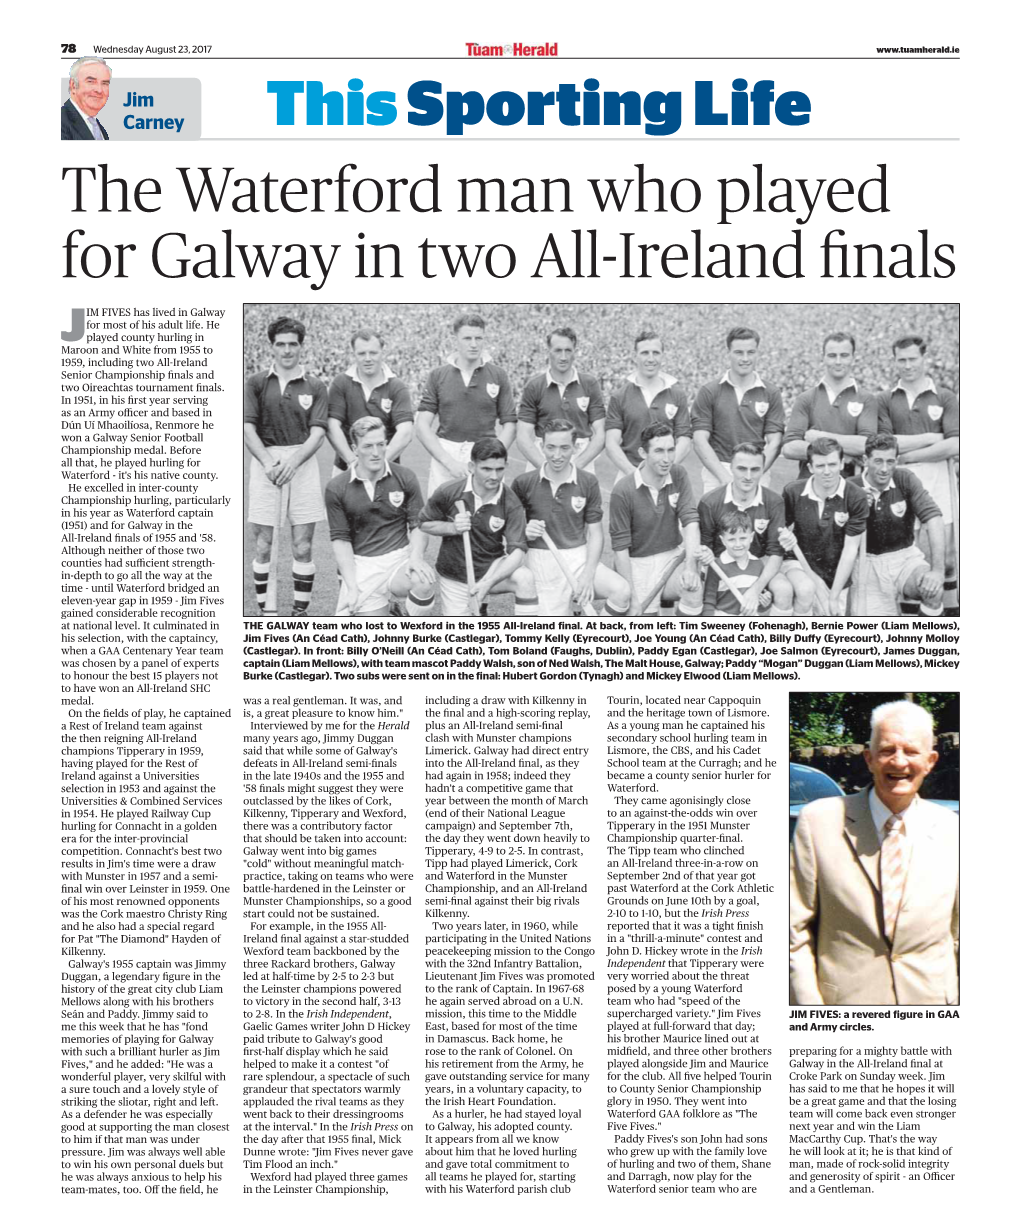 This Sporting Life the Waterford Man Who Played for Galway in Two All-Ireland Finals